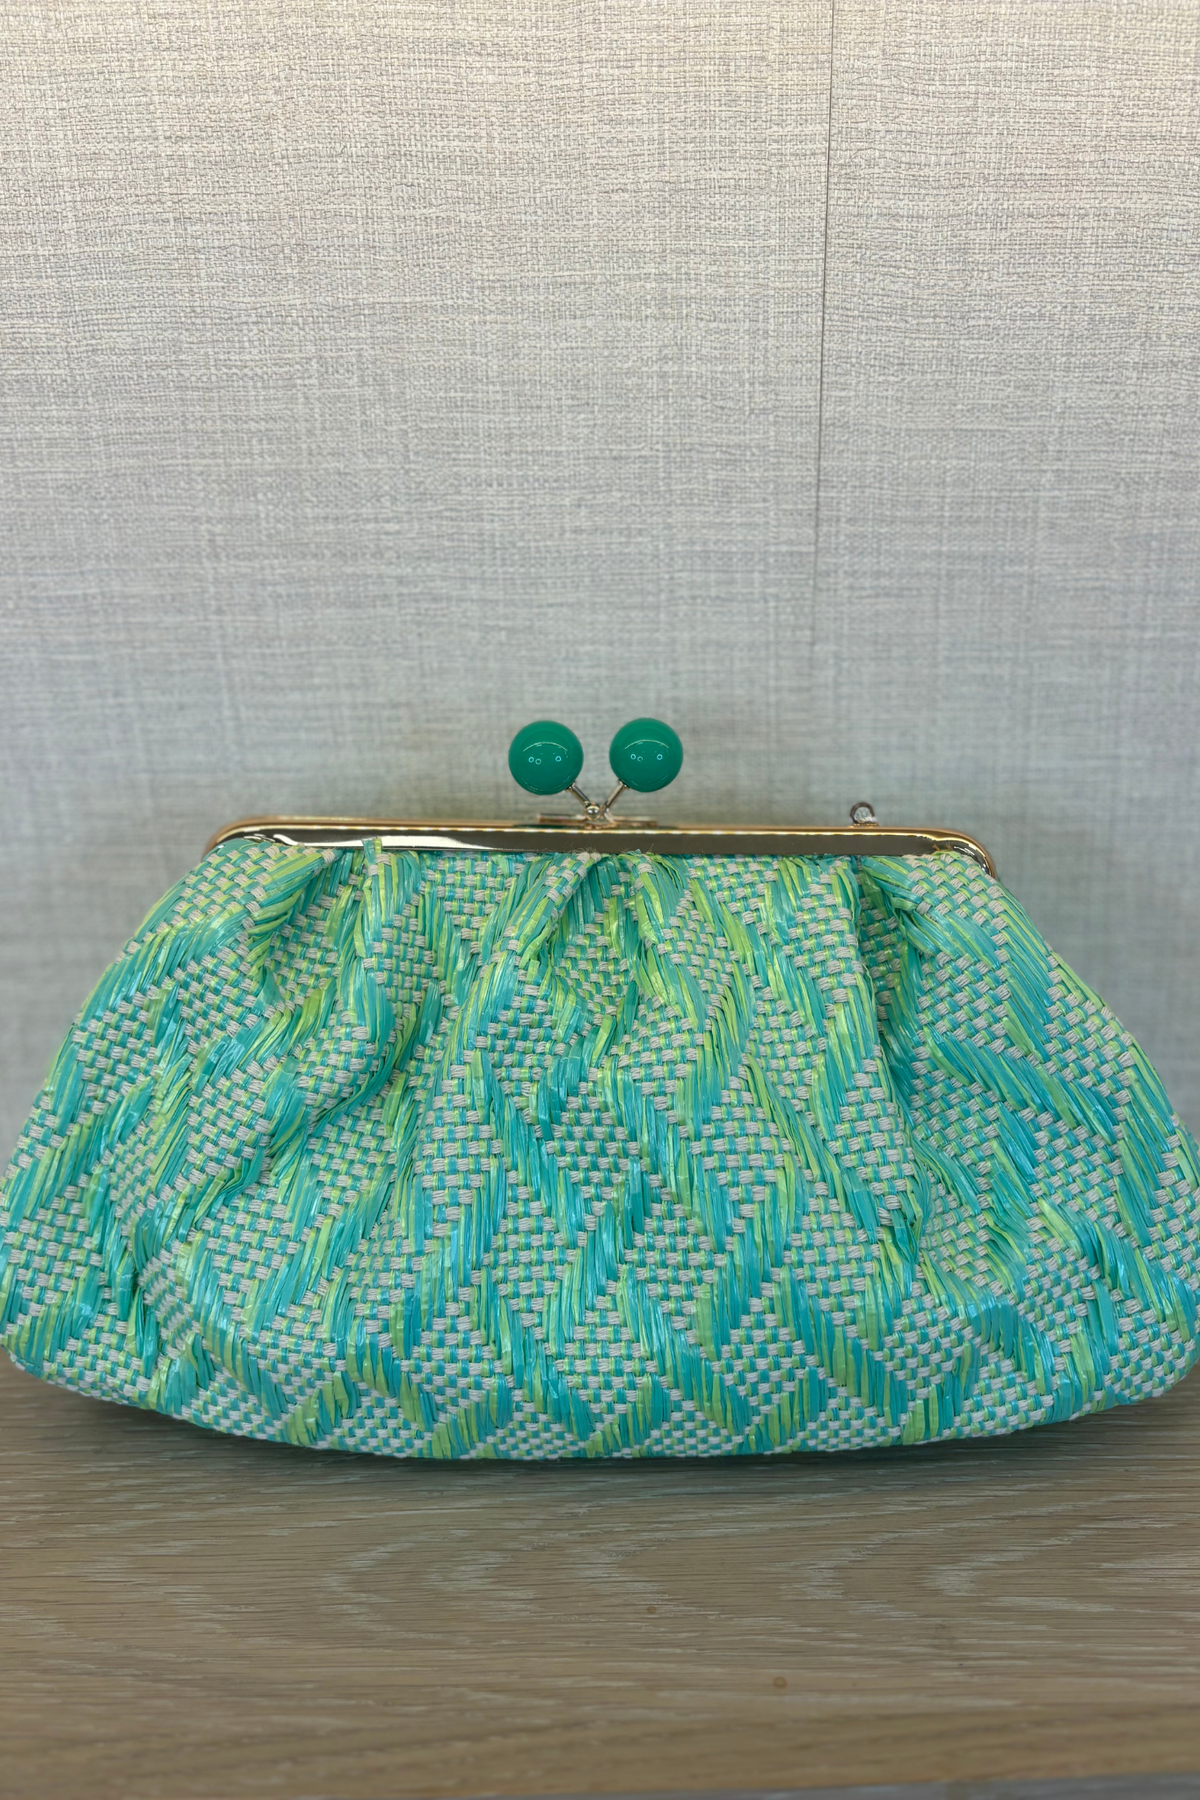 Polly Croc Style Bag In Green Mix